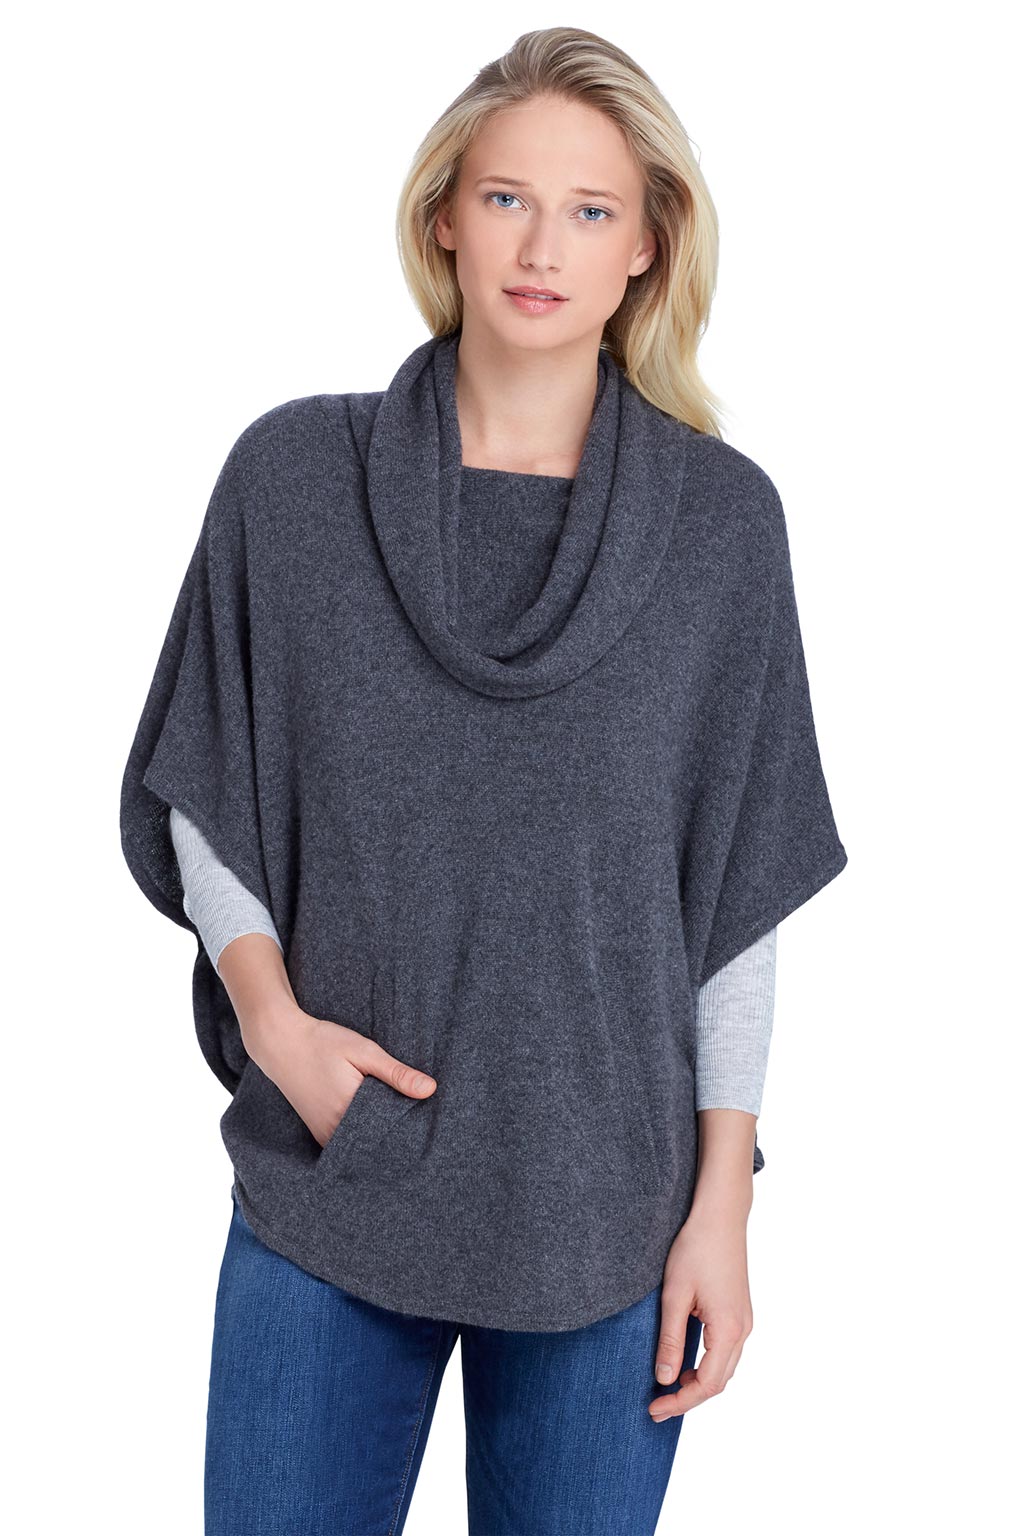 Model wearing the Alpine Cashmere Cowl Neck Poncho featuring a kangaroo pocket